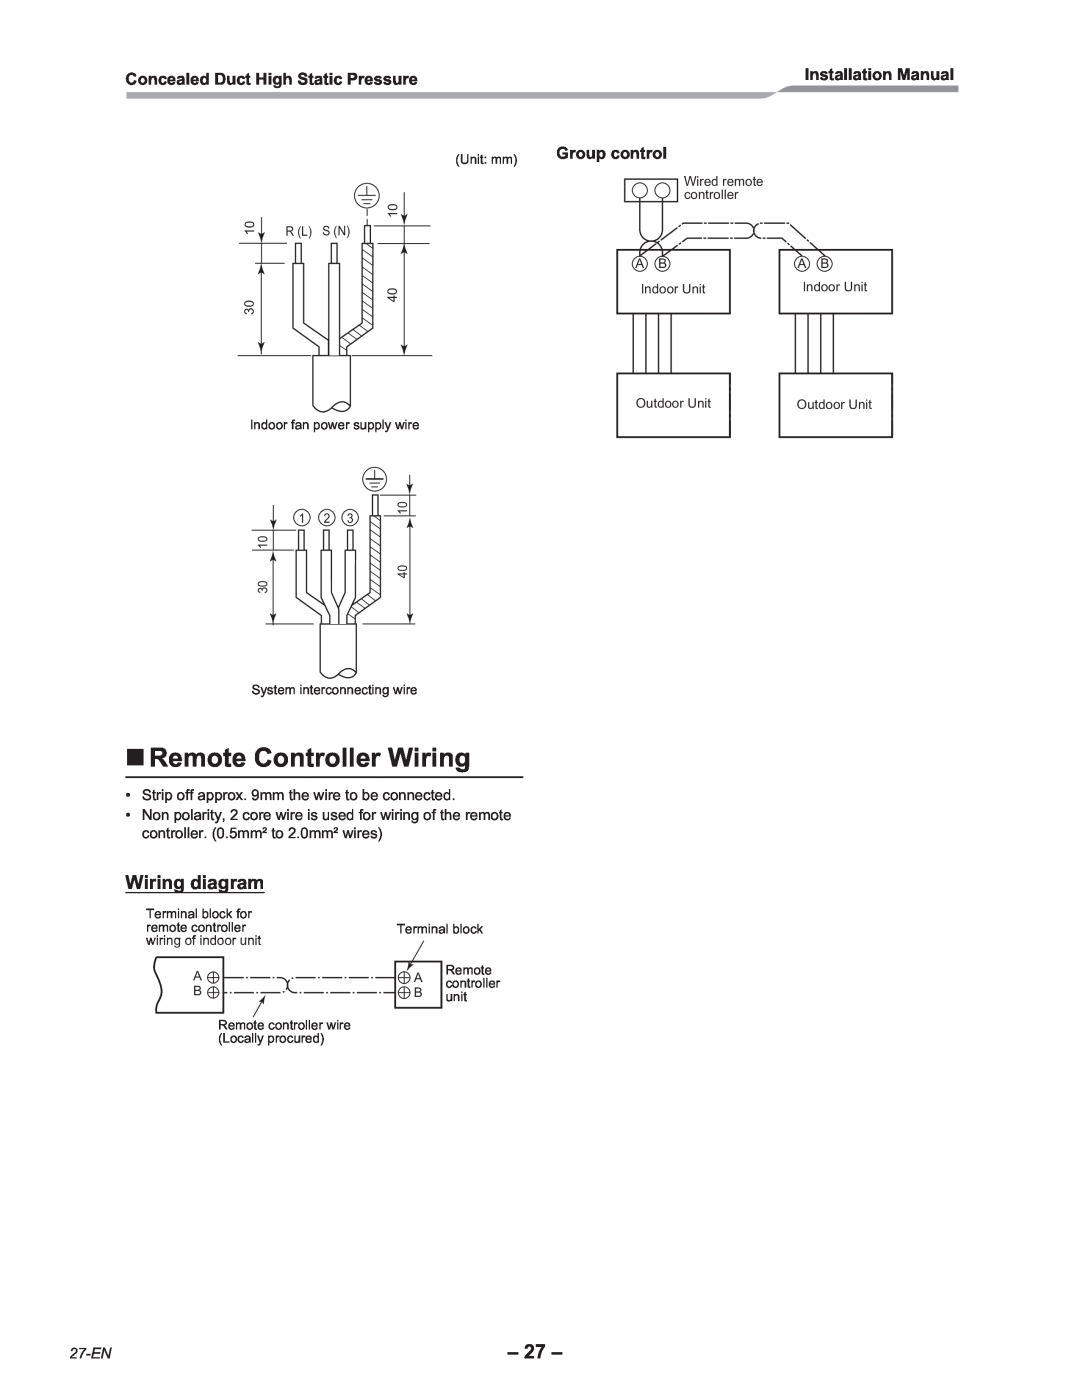 Toshiba RAV-SM2802DT-E Remote Controller Wiring, Wiring diagram, Concealed Duct High Static Pressure, Group control, 27-EN 